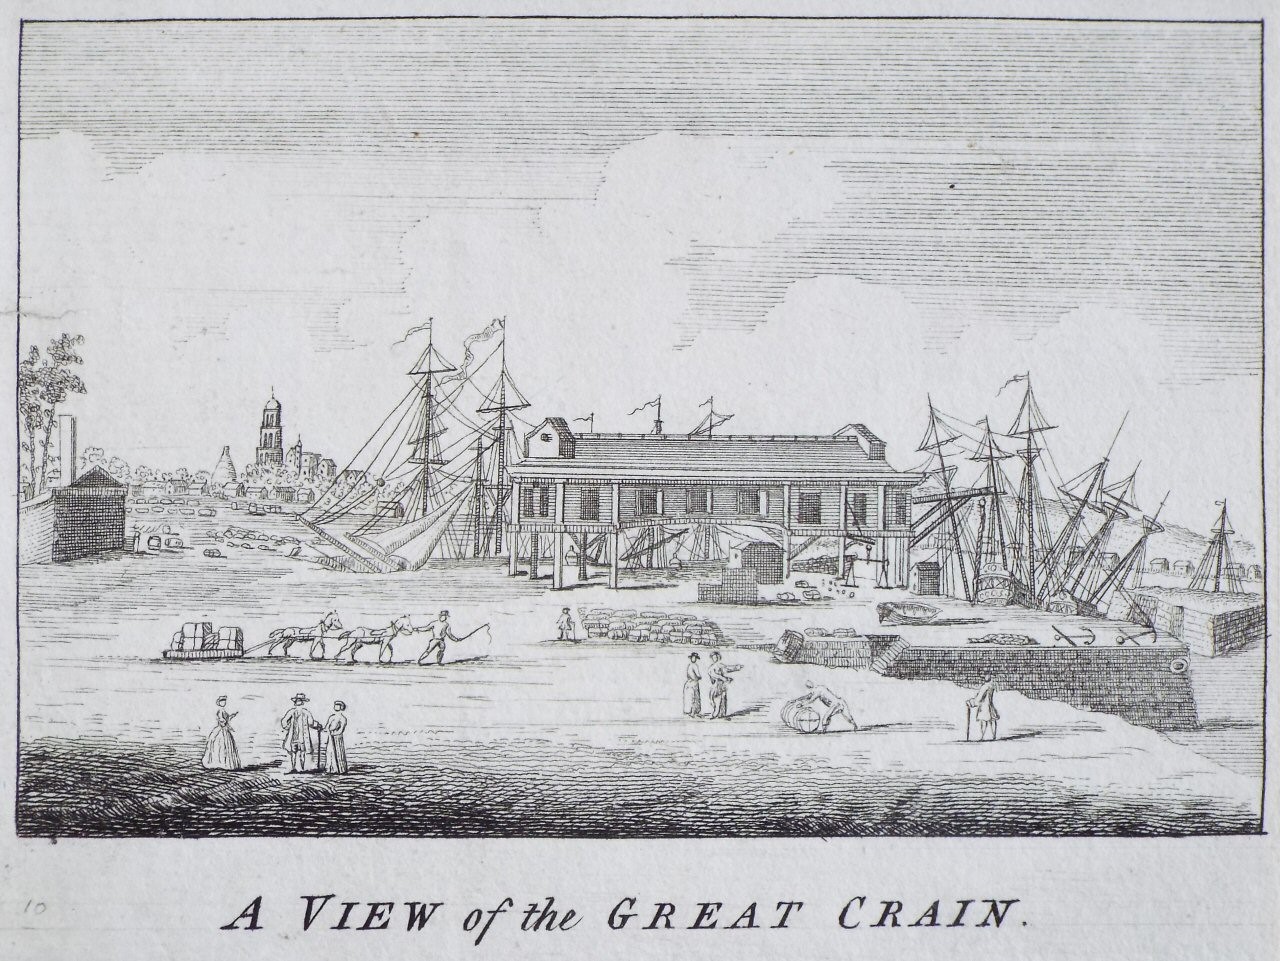 Print - A View of the Great Crain.